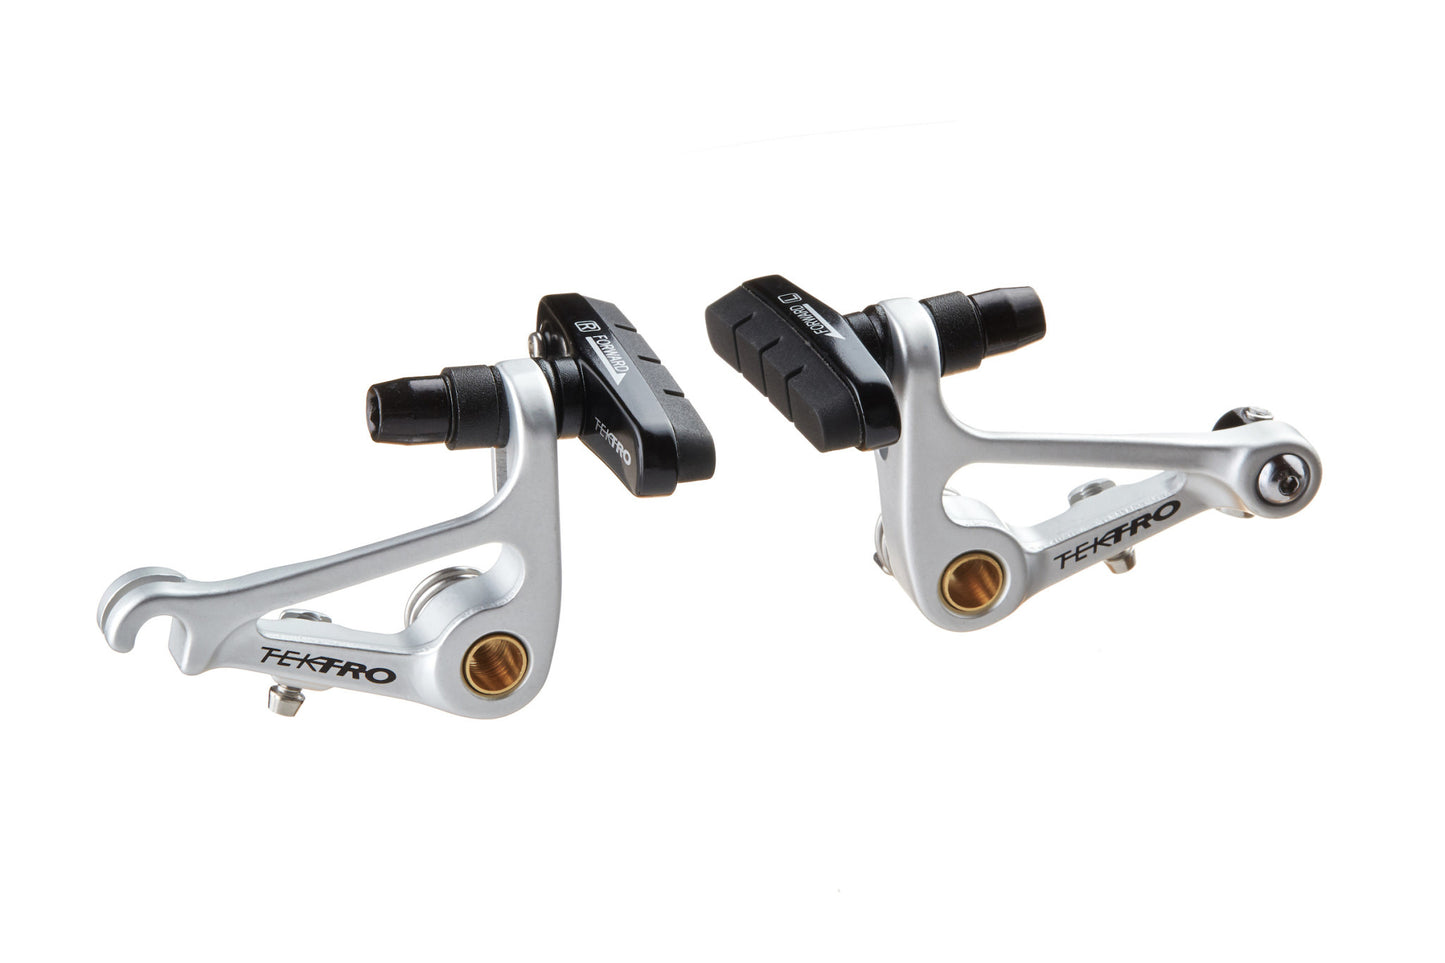 CR720 Cantilever Brakes Pair, Polished